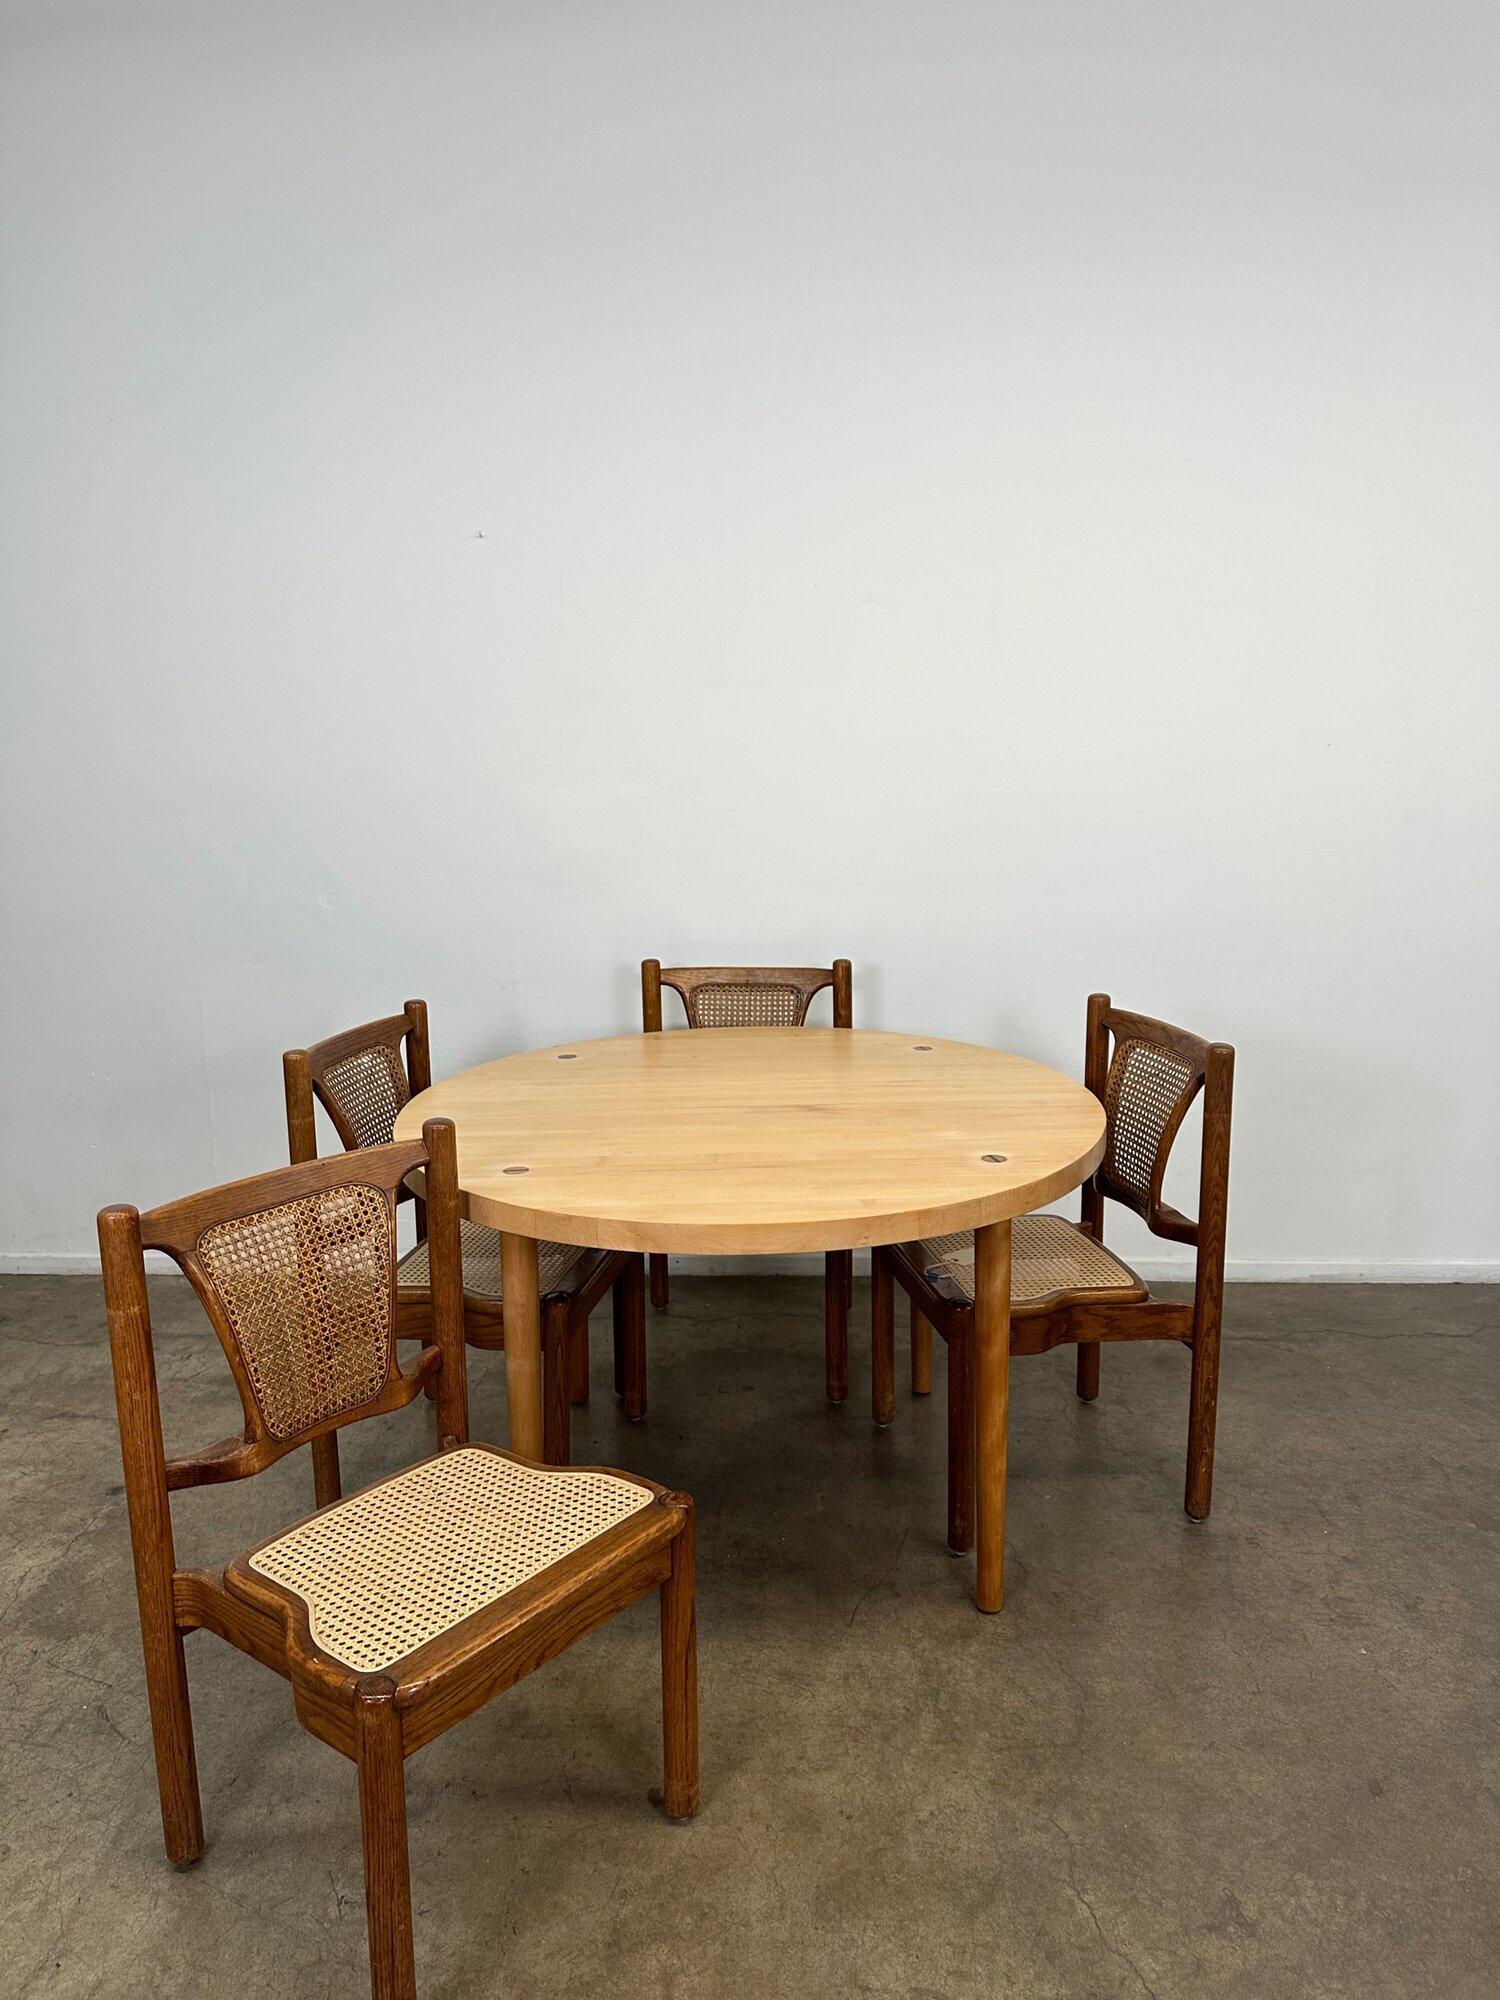 Maple butcher block table by Claud Bunyard In Good Condition For Sale In Los Angeles, CA